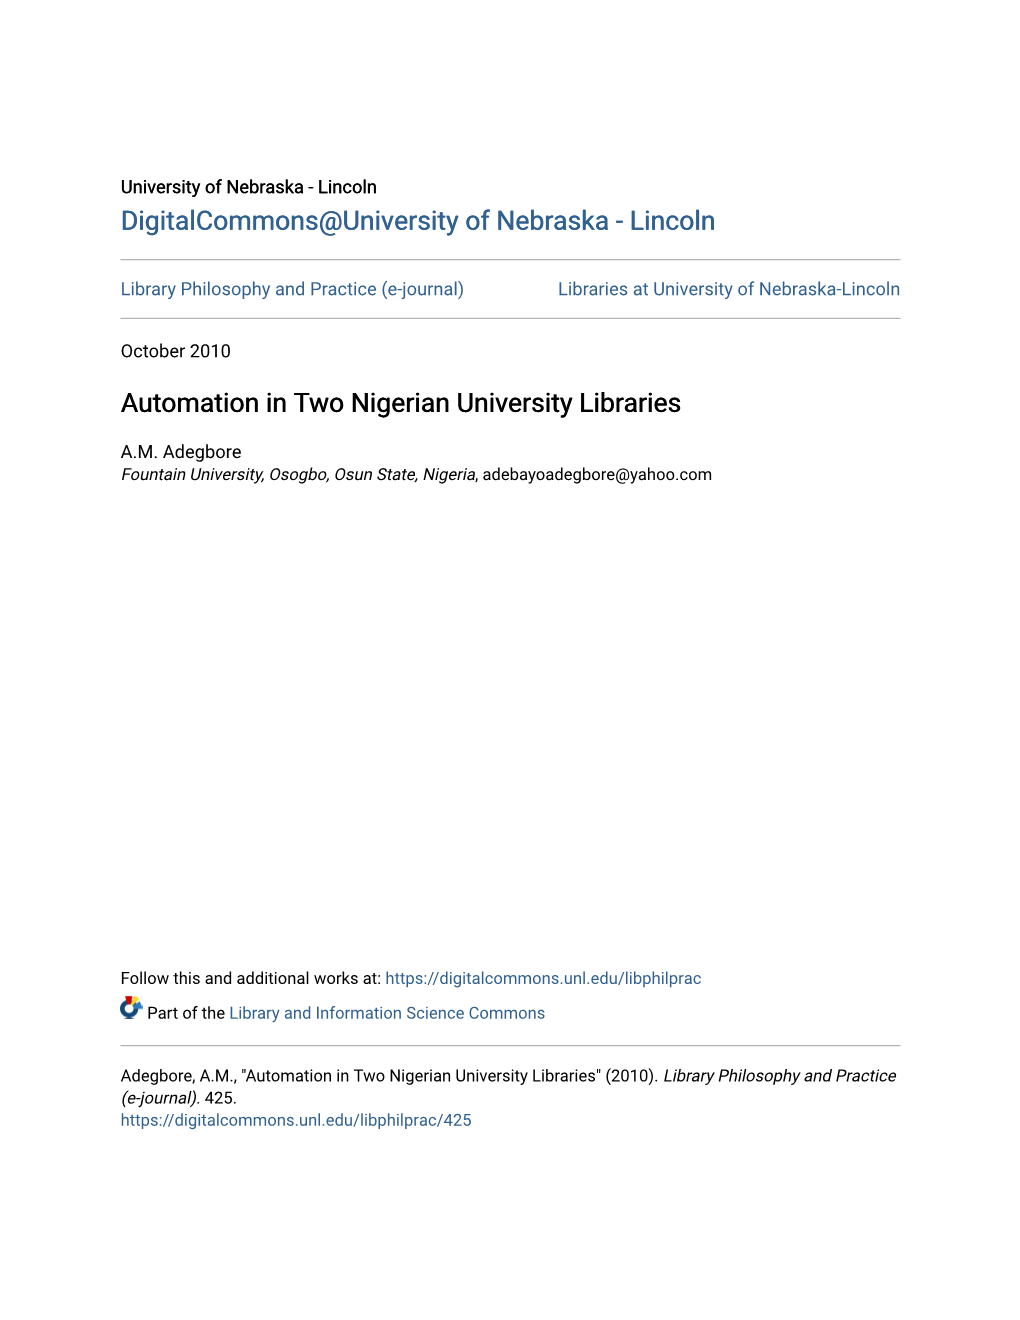 Automation in Two Nigerian University Libraries